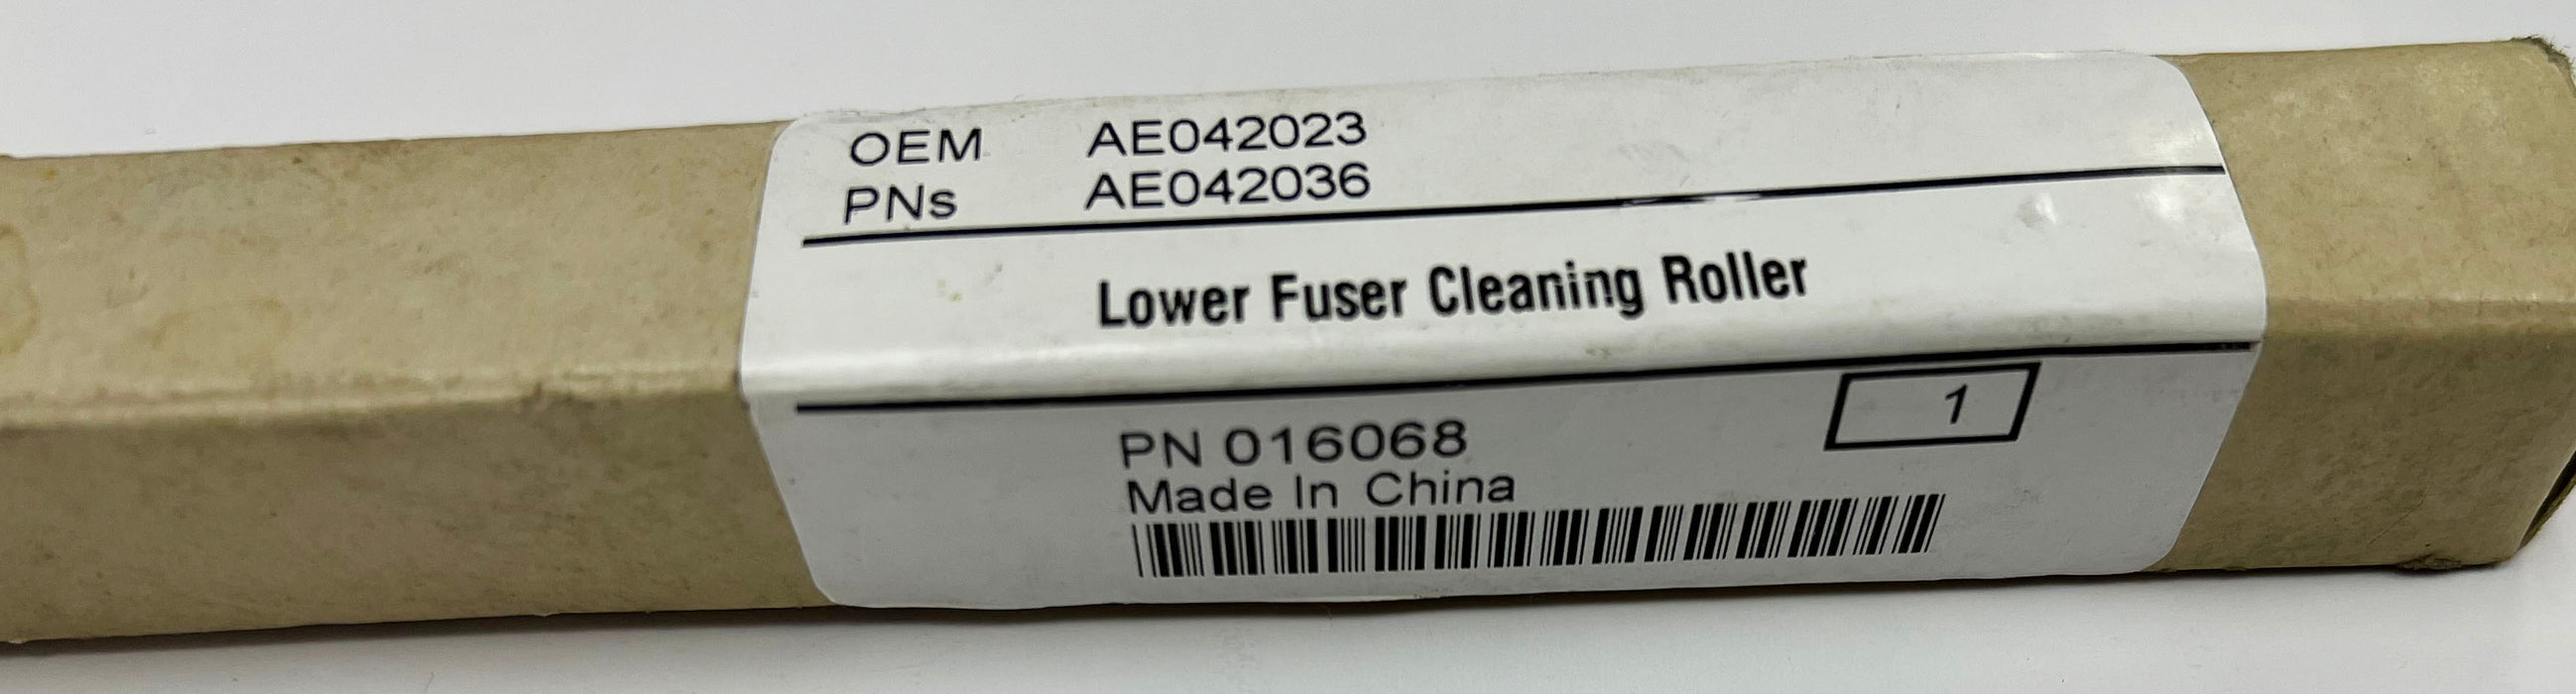 Genuine Ricoh Lower Fuser Cleaning Roller | AE04-2023